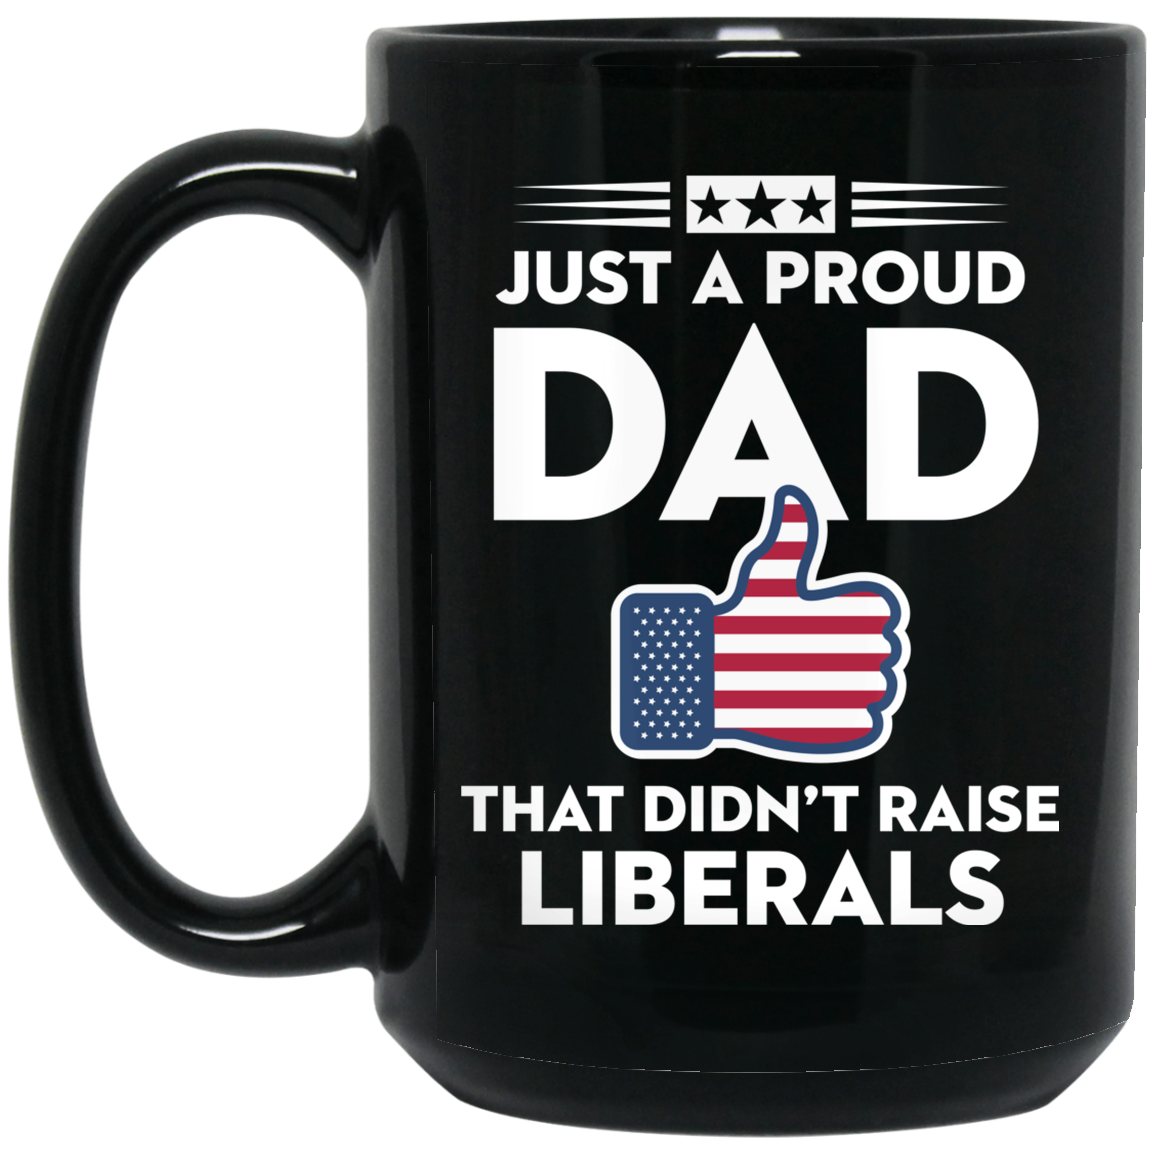 Just A Proud Dad That Didn't Raise Liberals - MUGS